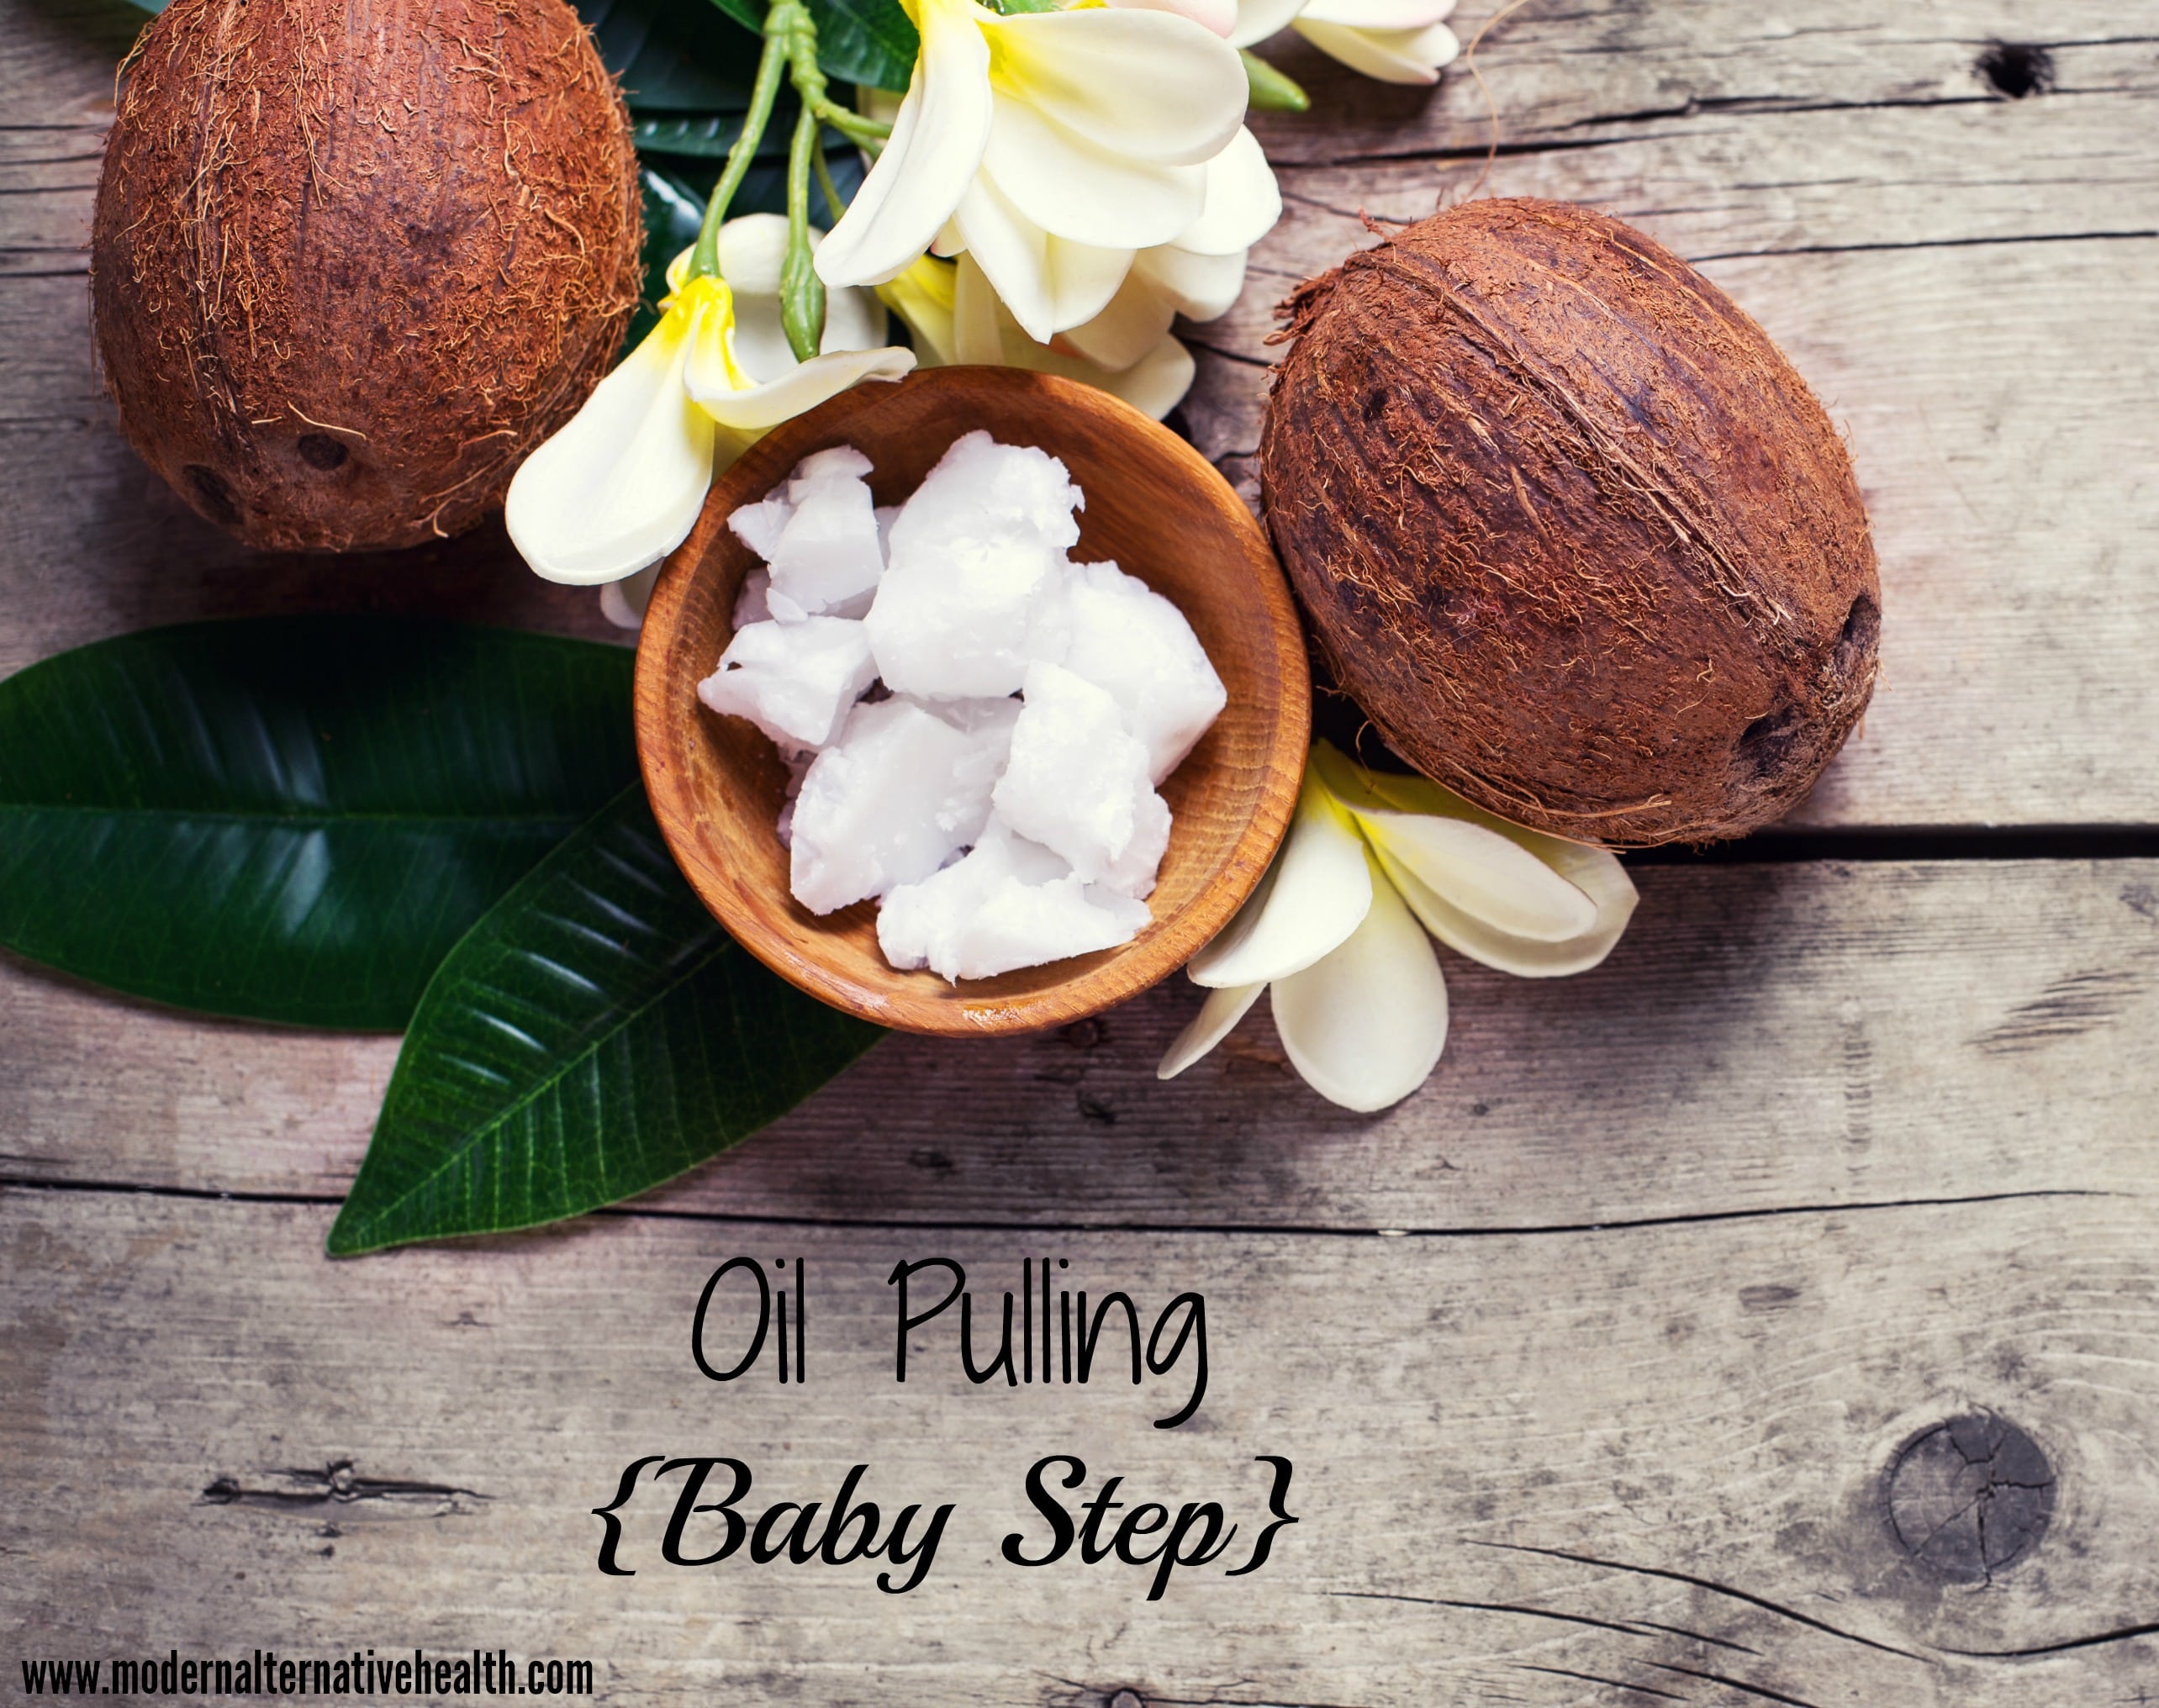 Oil Pulling {Baby Step}